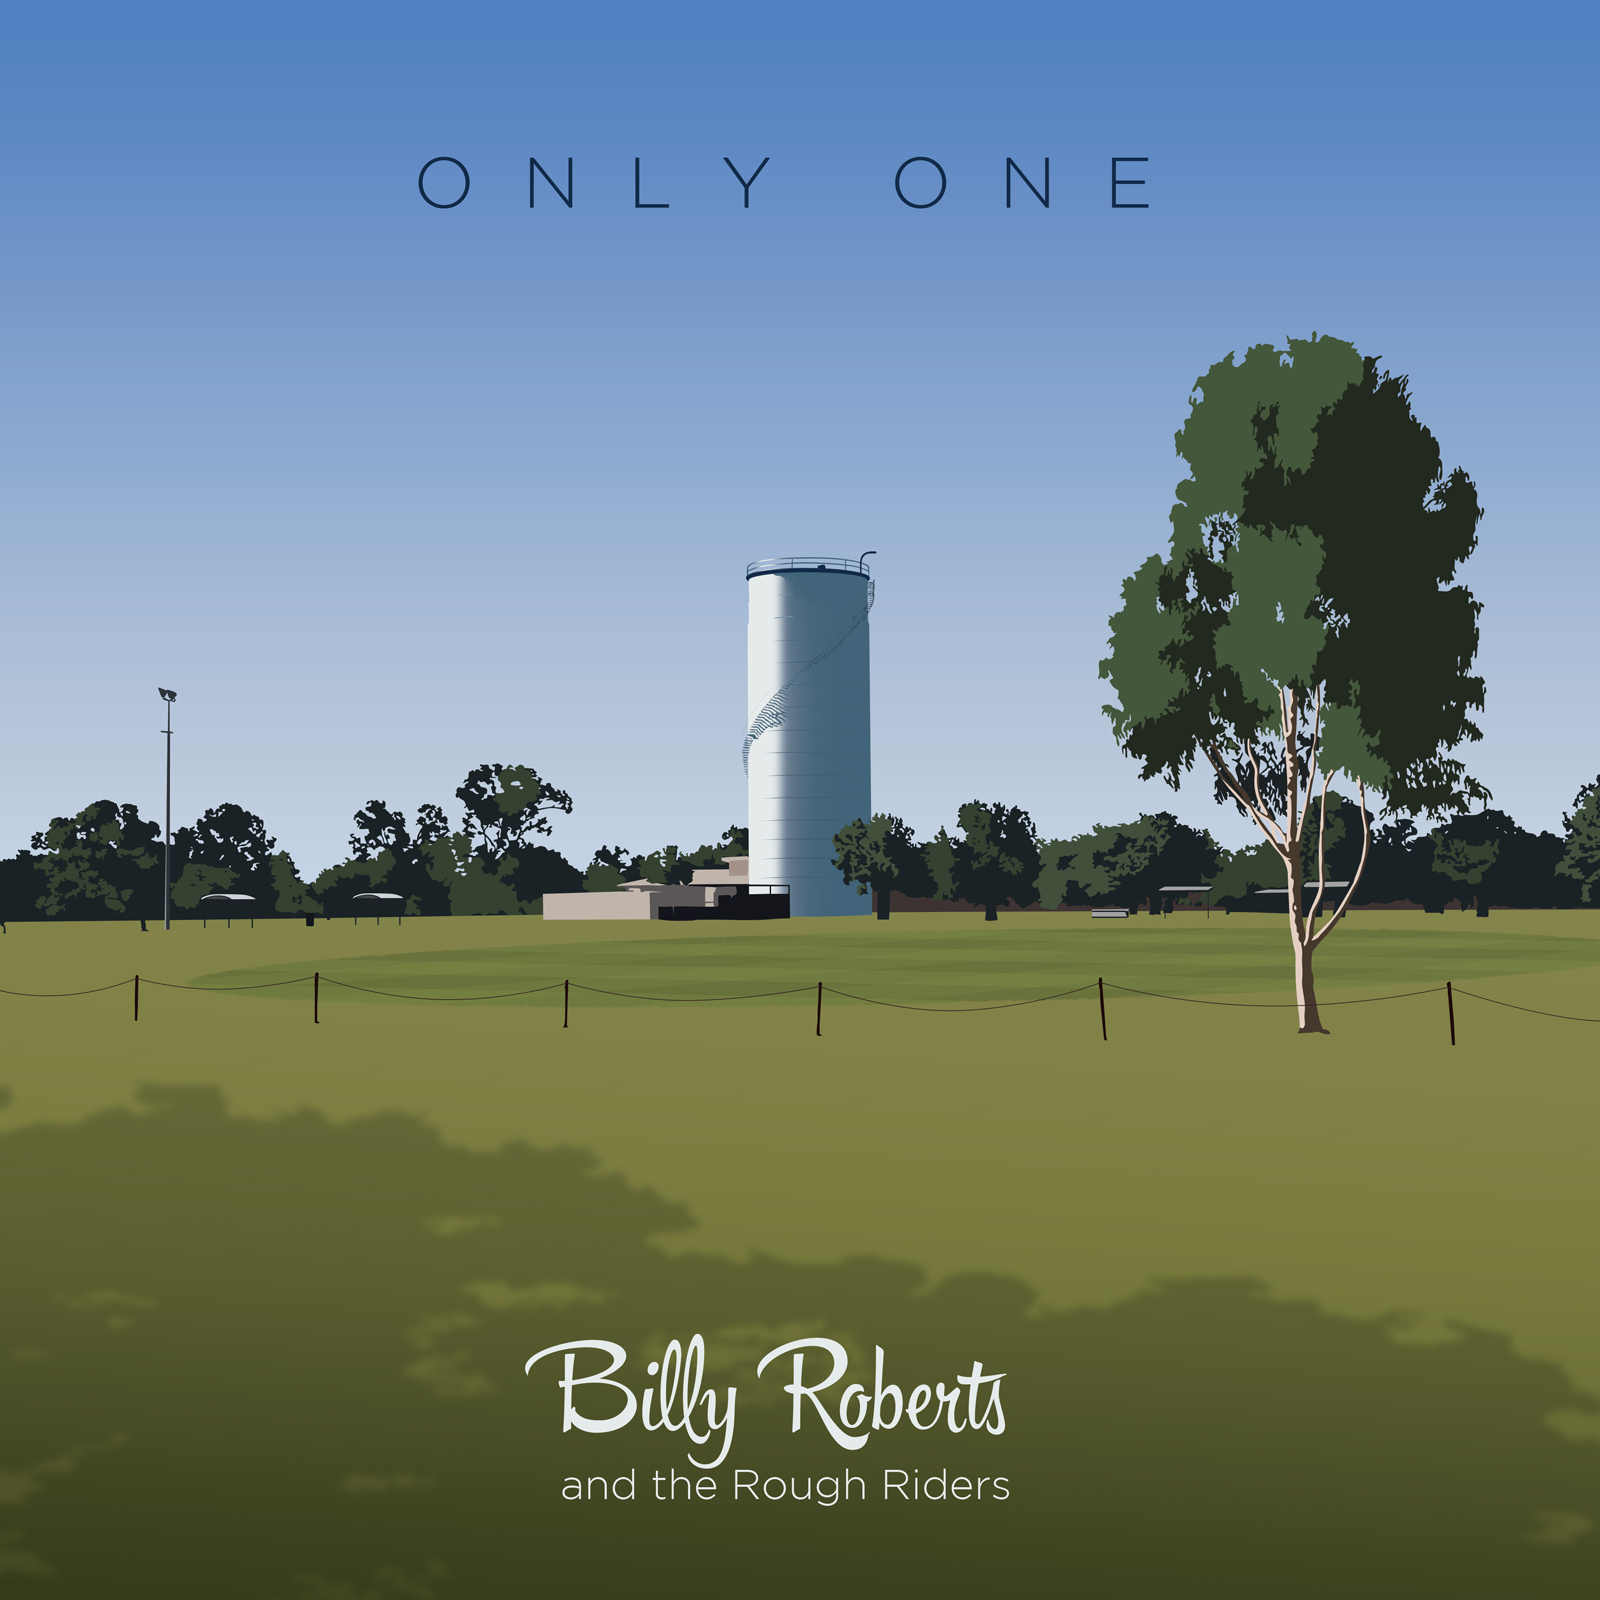  Billy Roberts And The Rough Riders – “Only One”